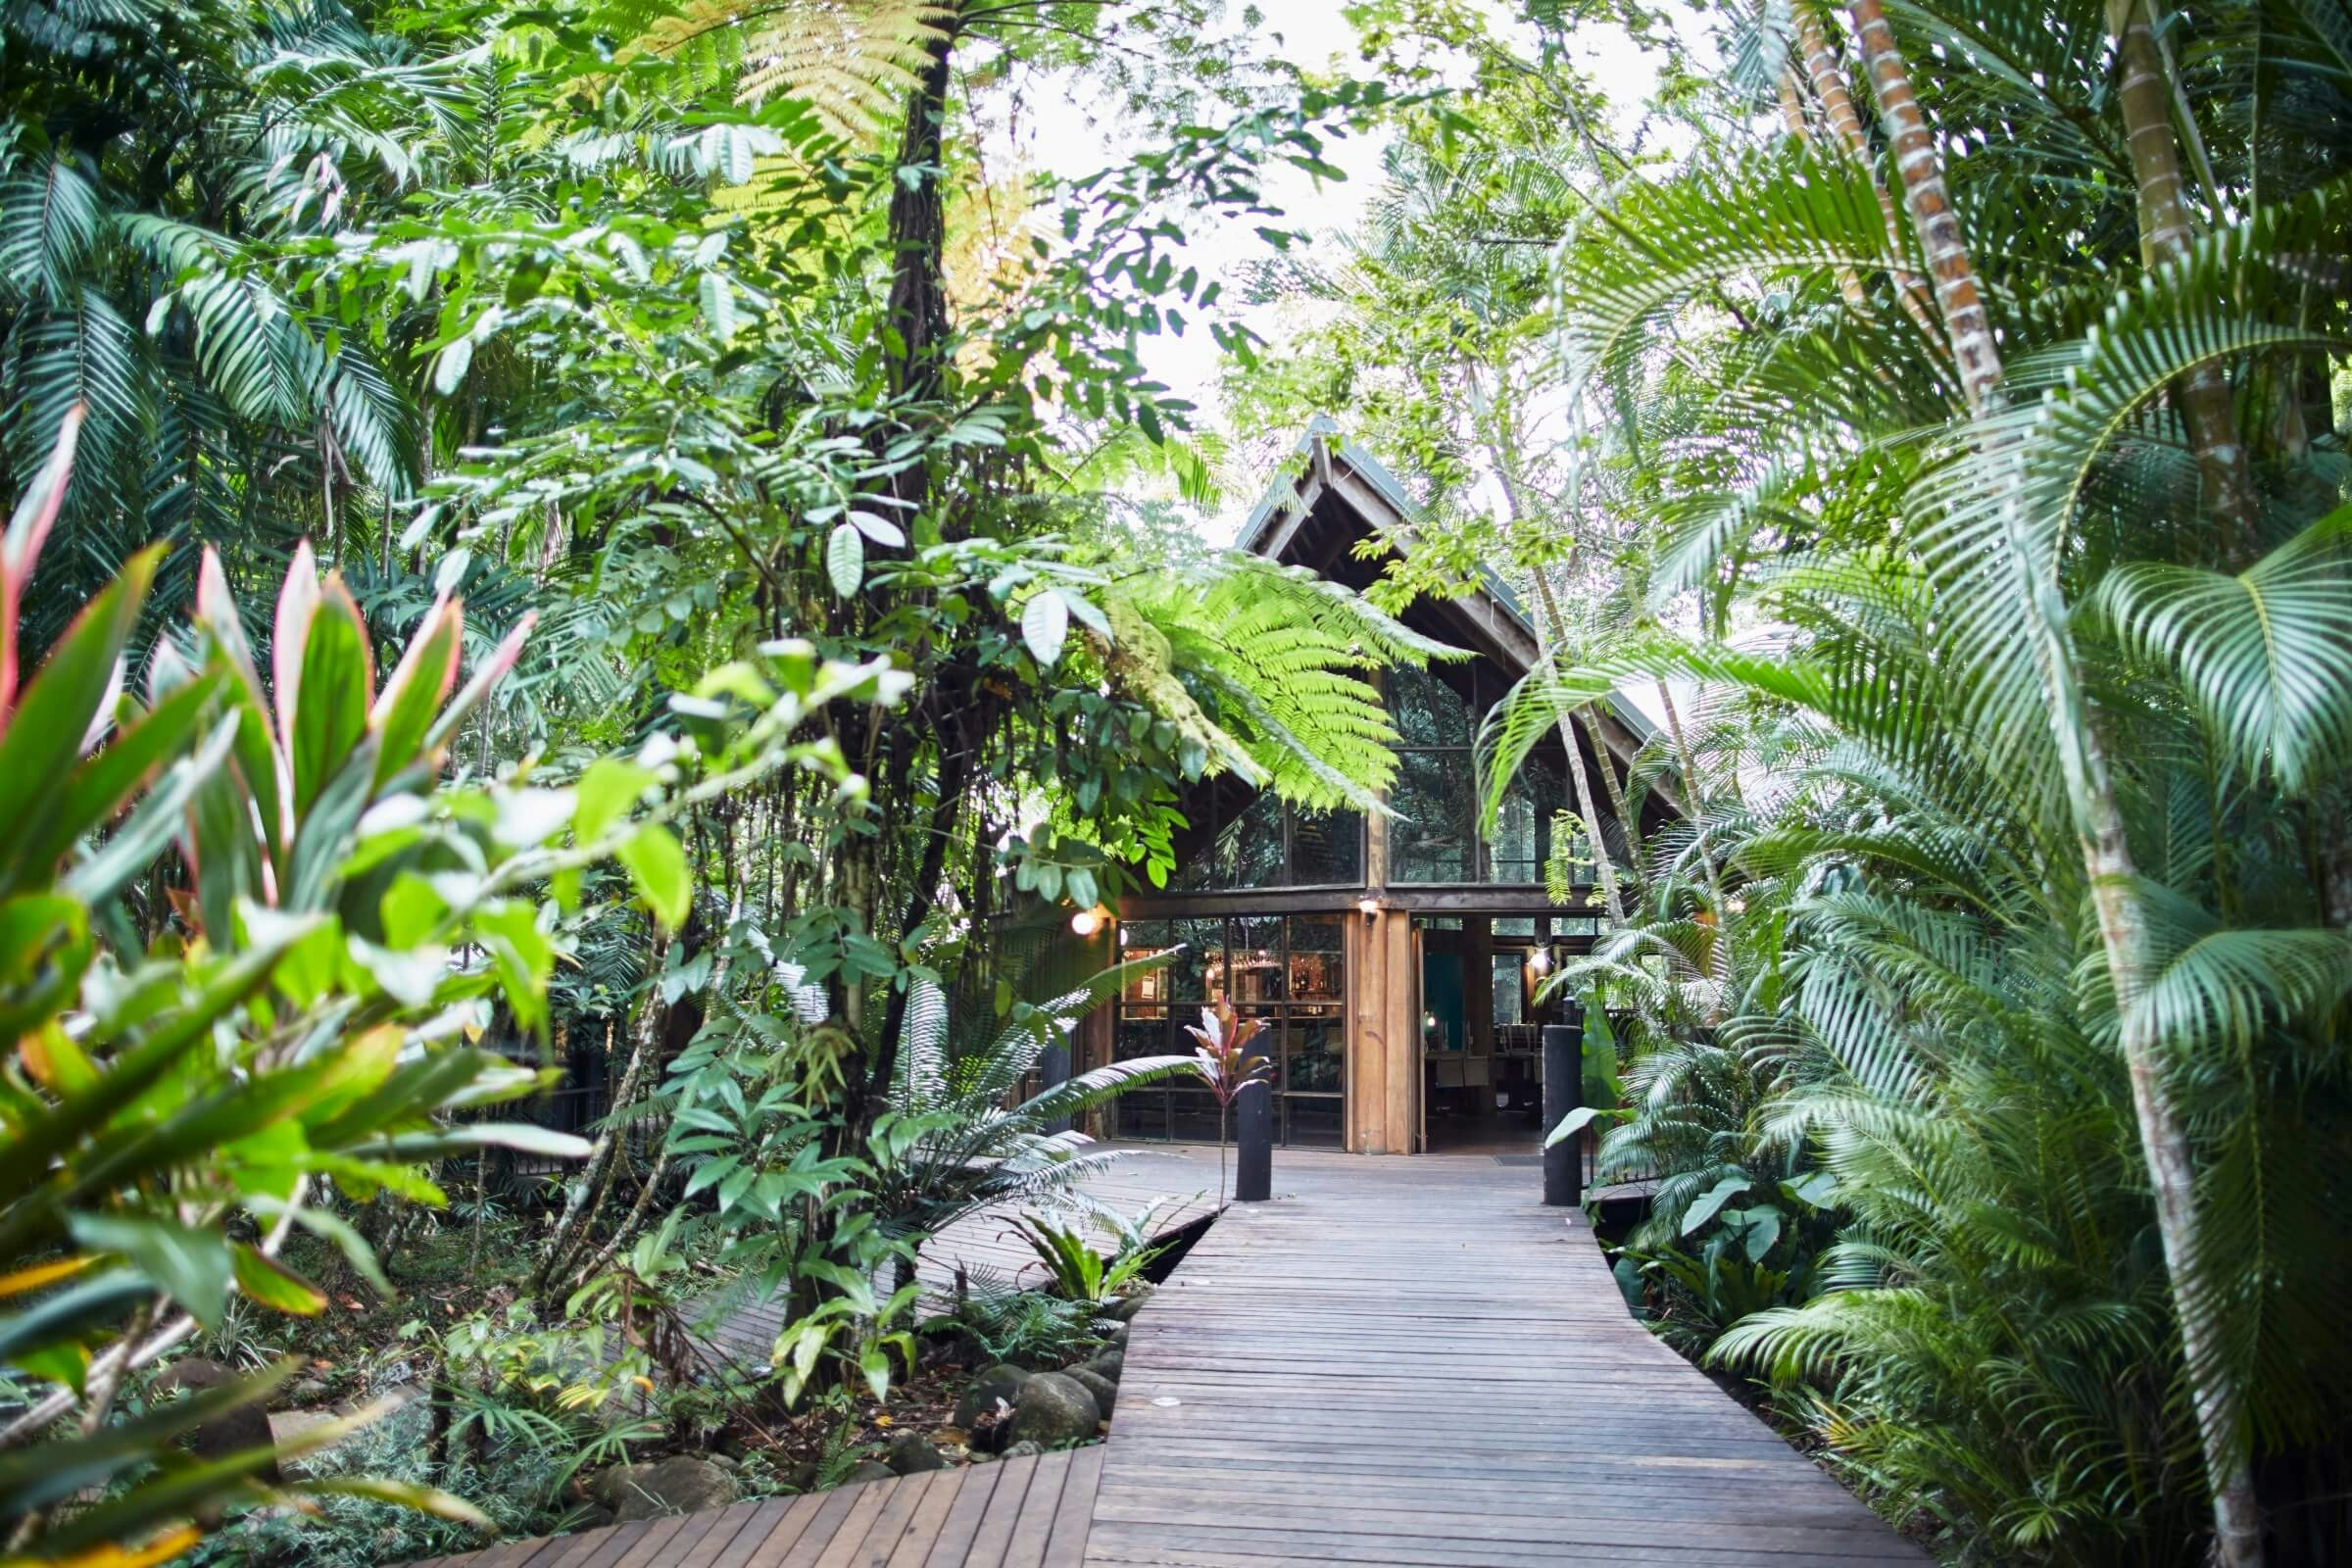 A wooden boardwalk is surrounded by leafy tropical plants. A wooden lodge is hidden in the background.